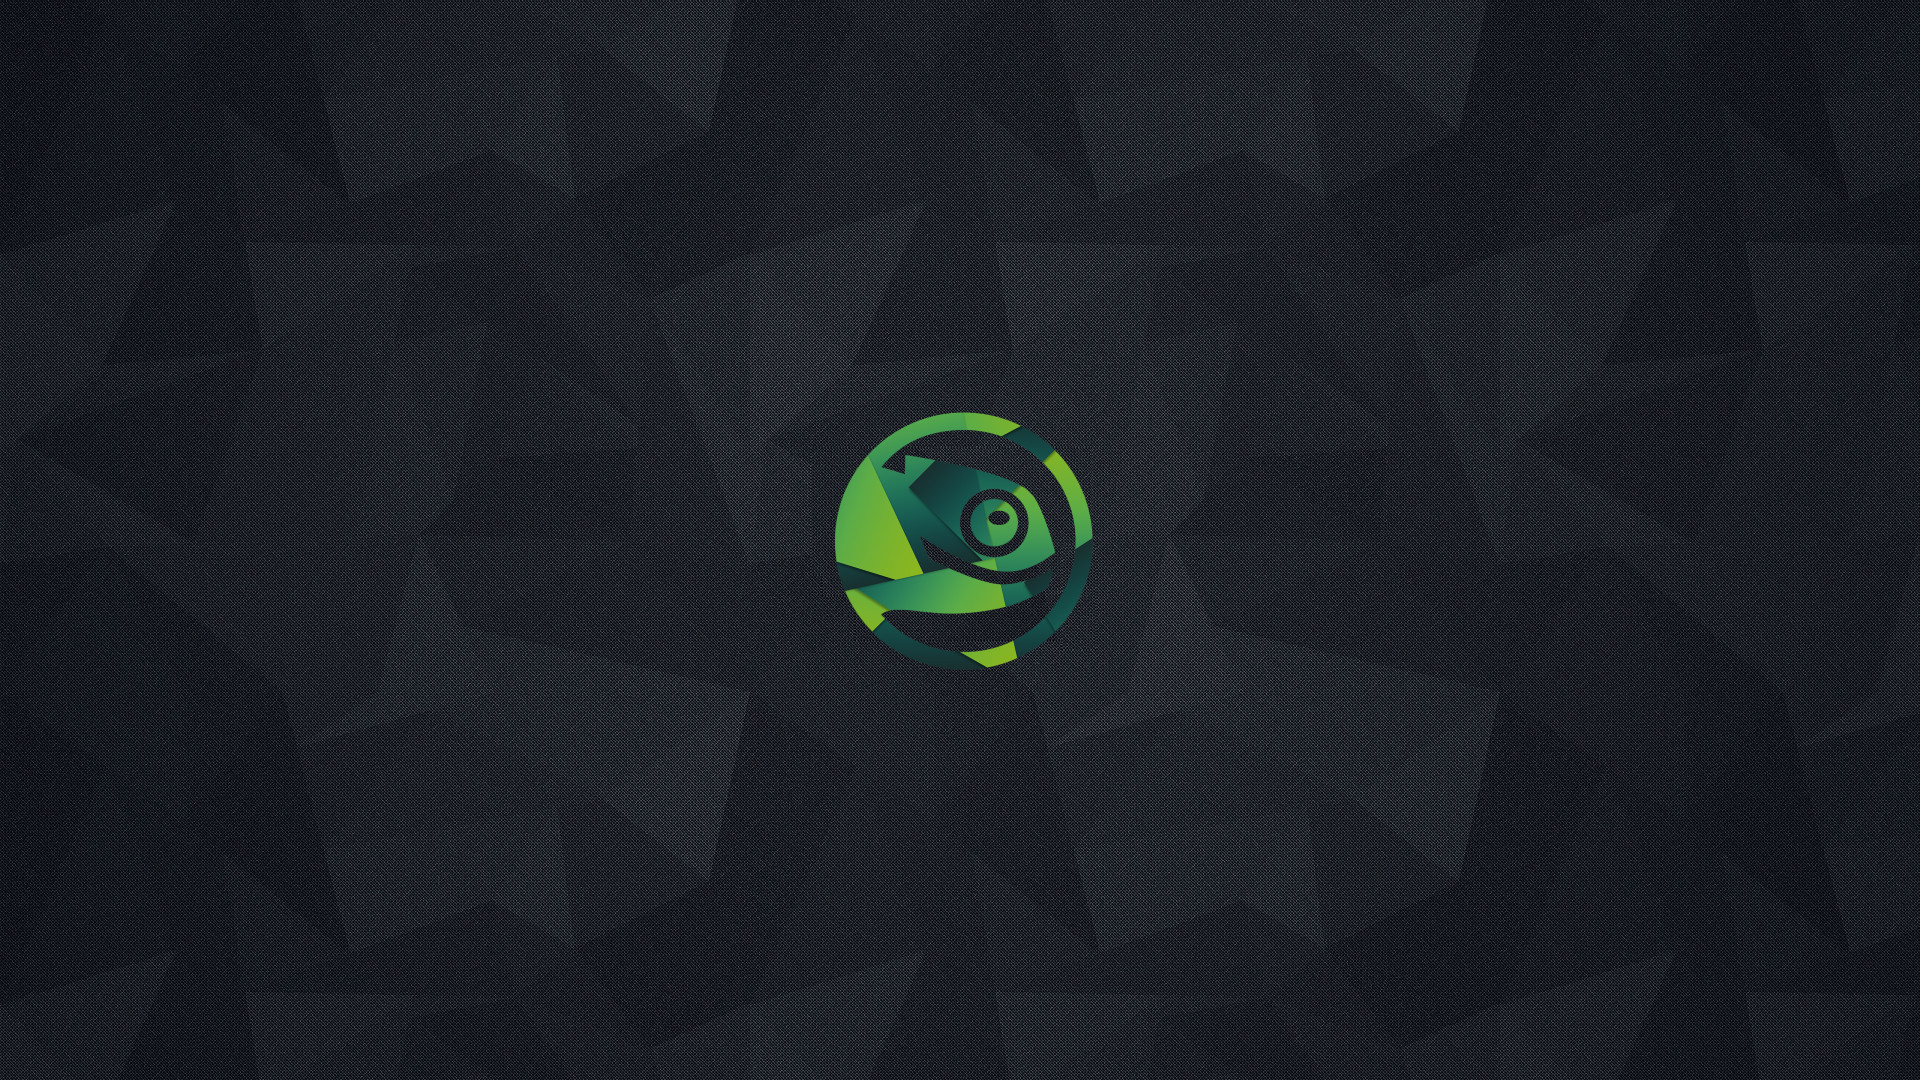 1920x1080 [openSUSE wallpaper] Here's a wallpaper I made for you guys.